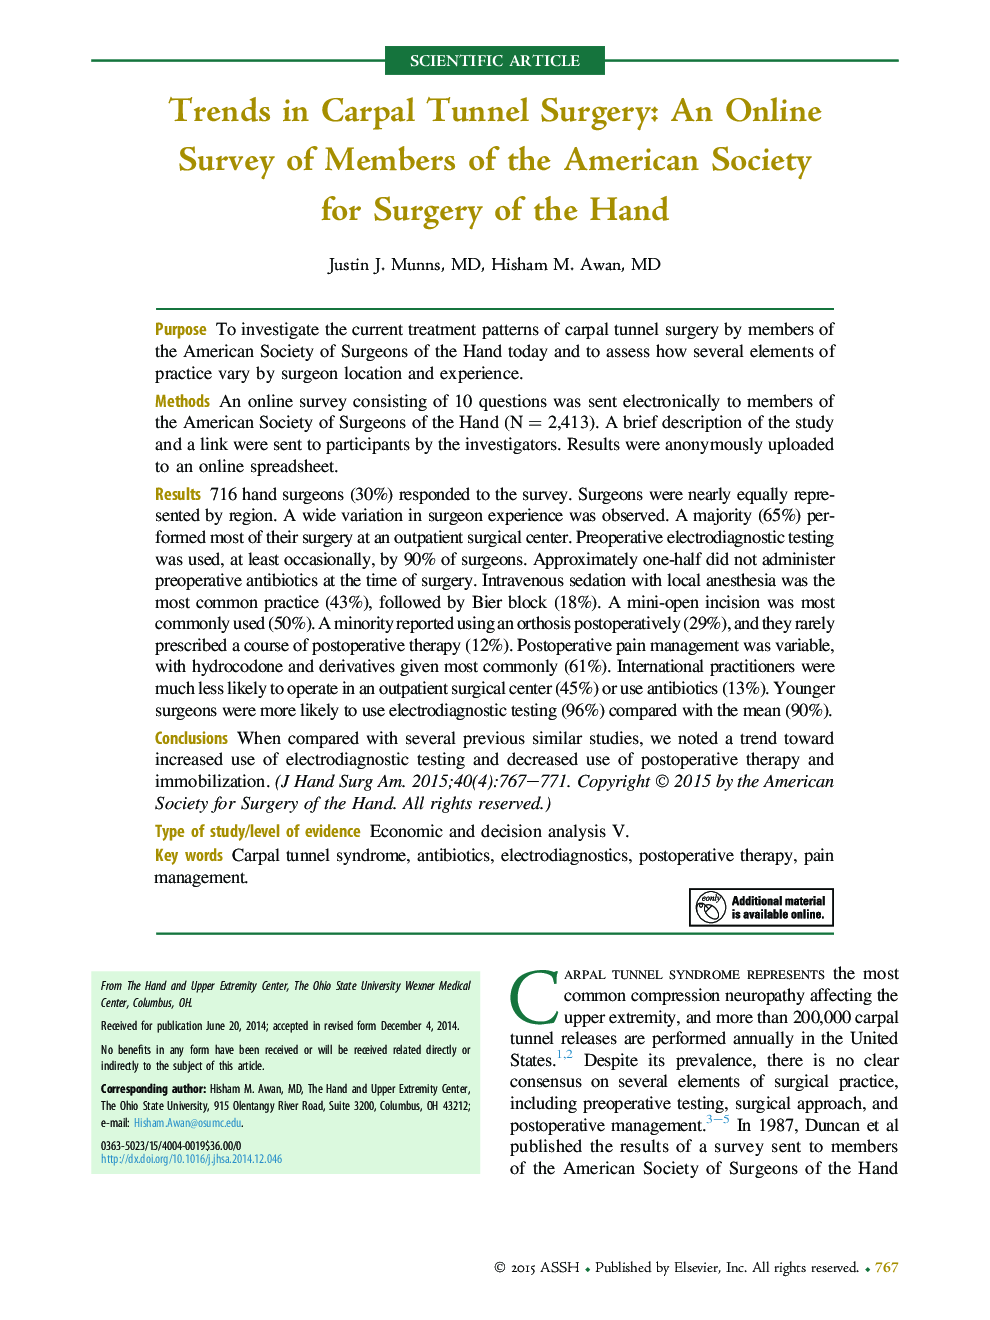 Trends in Carpal Tunnel Surgery: An Online Survey of Members of the American Society for Surgery of the Hand